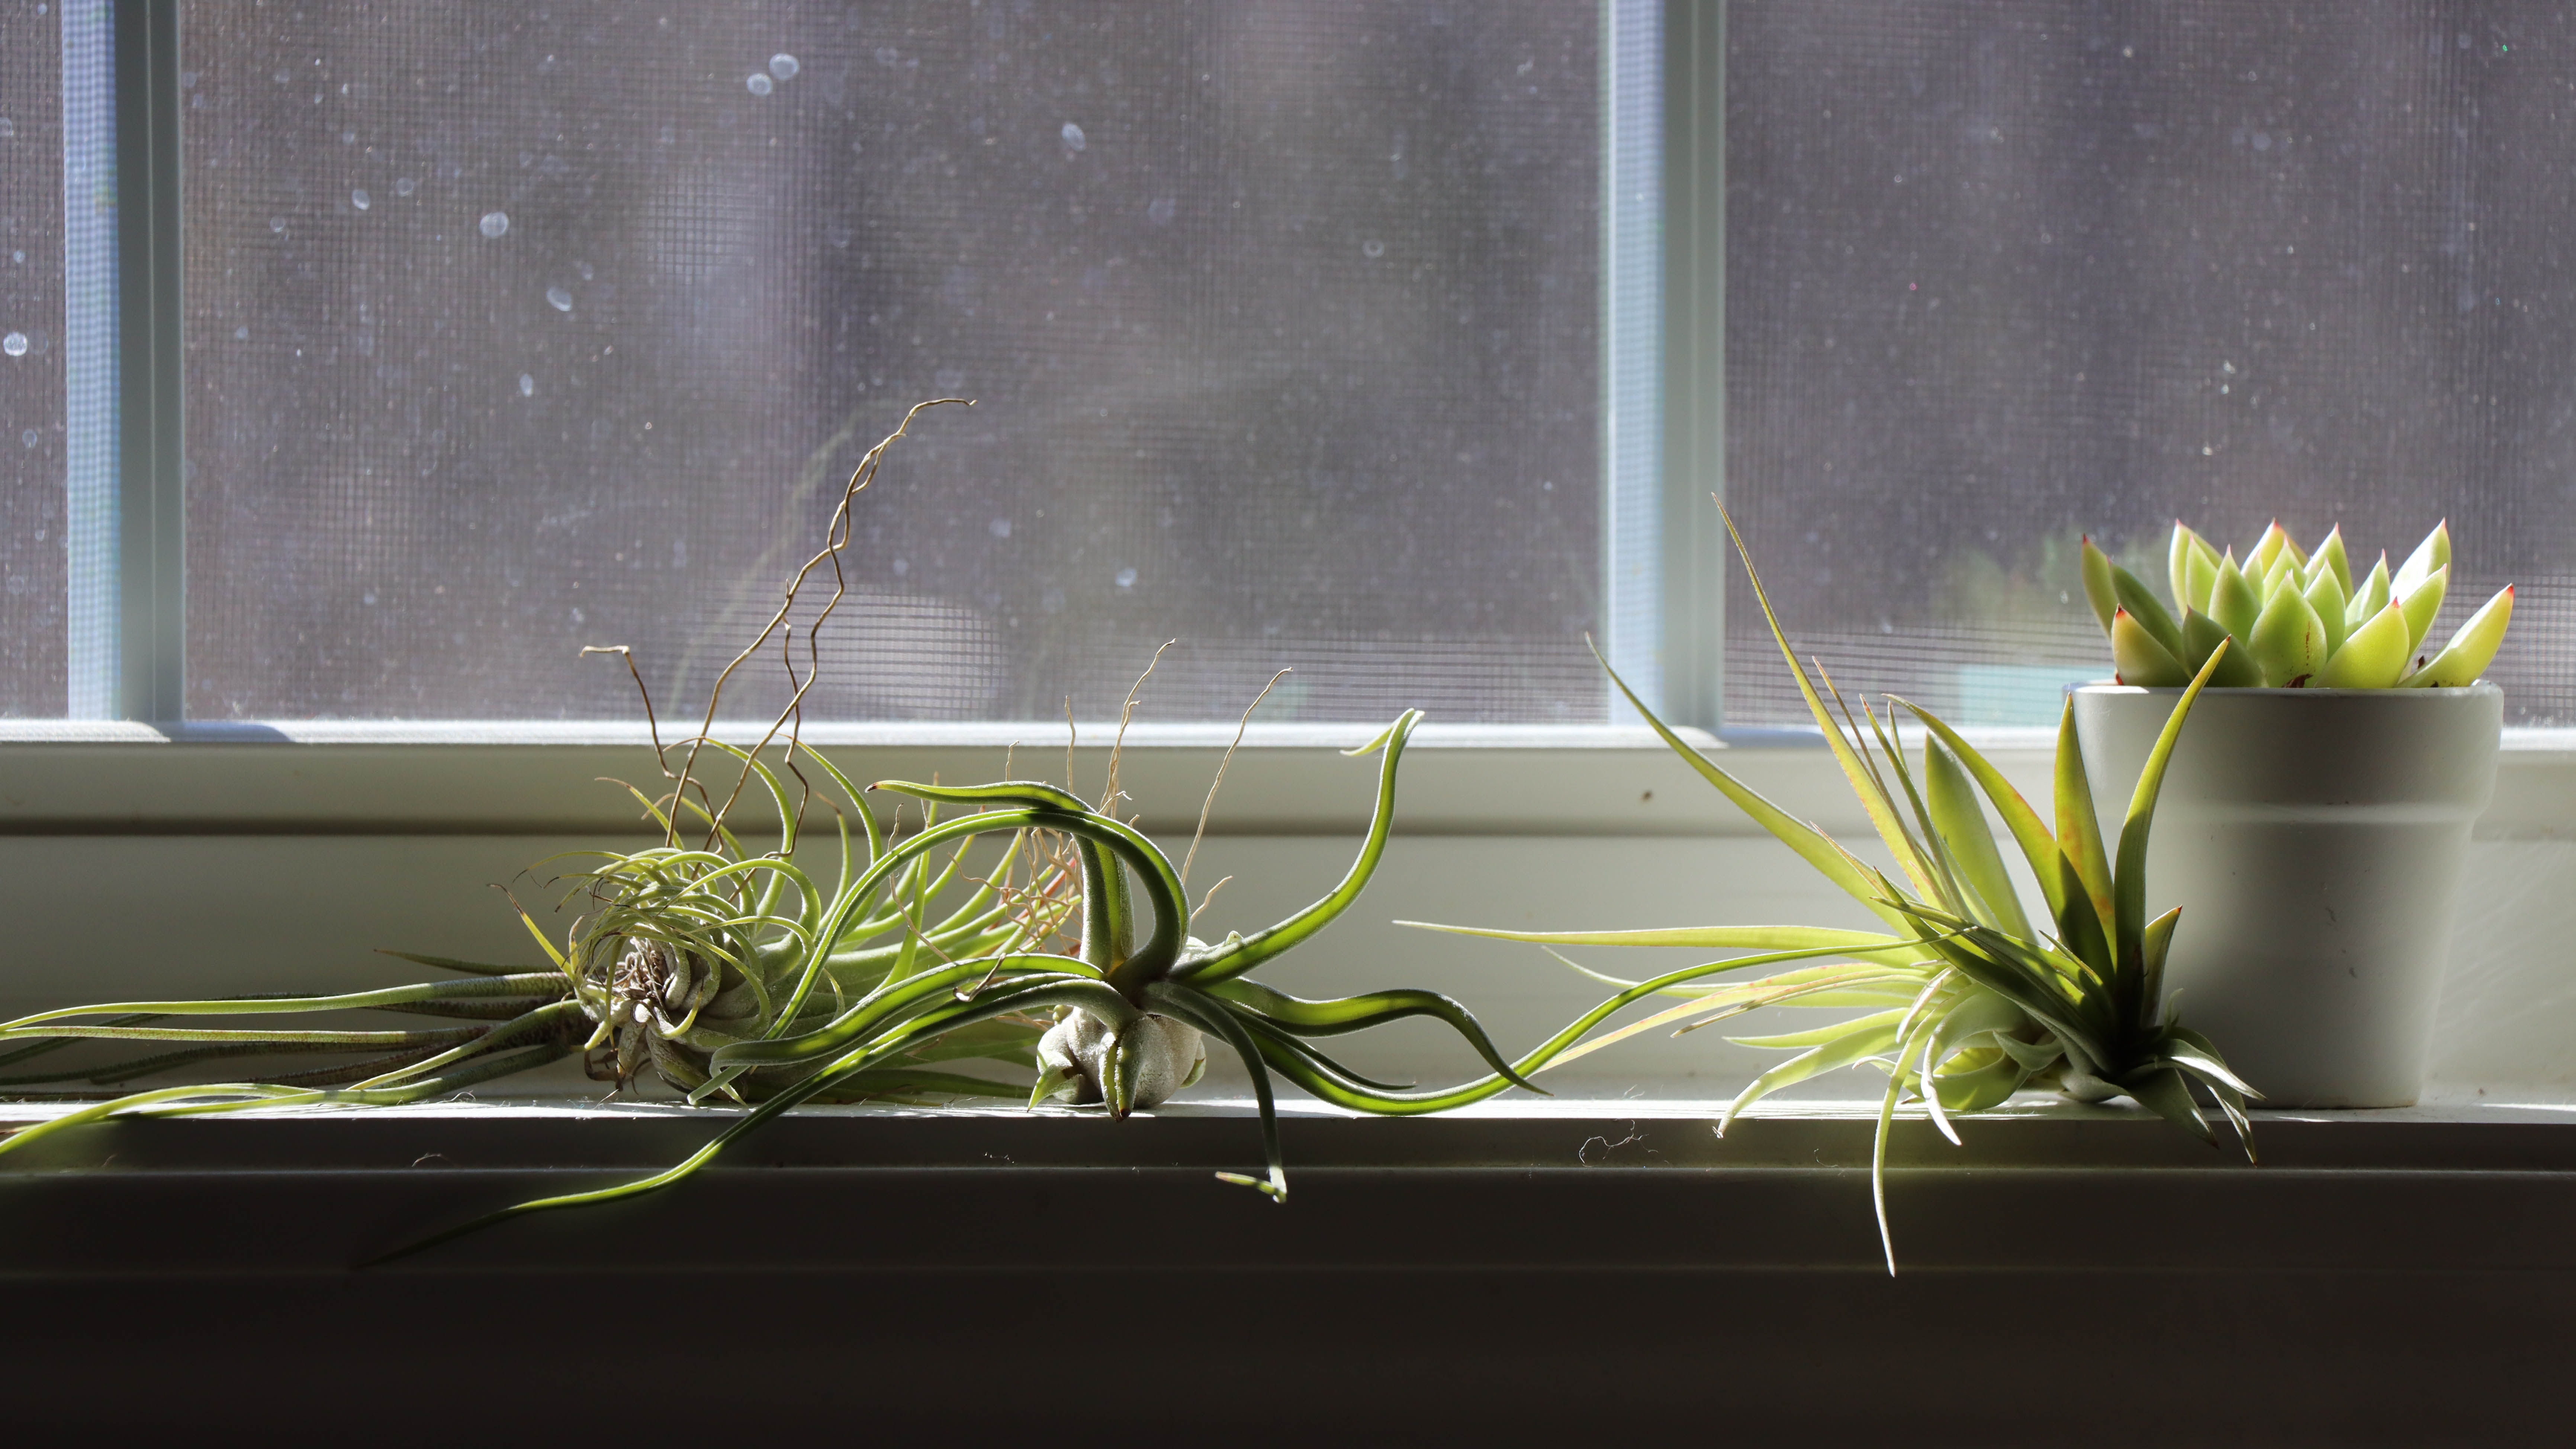 Air plants lined up on the windowsill under the lights